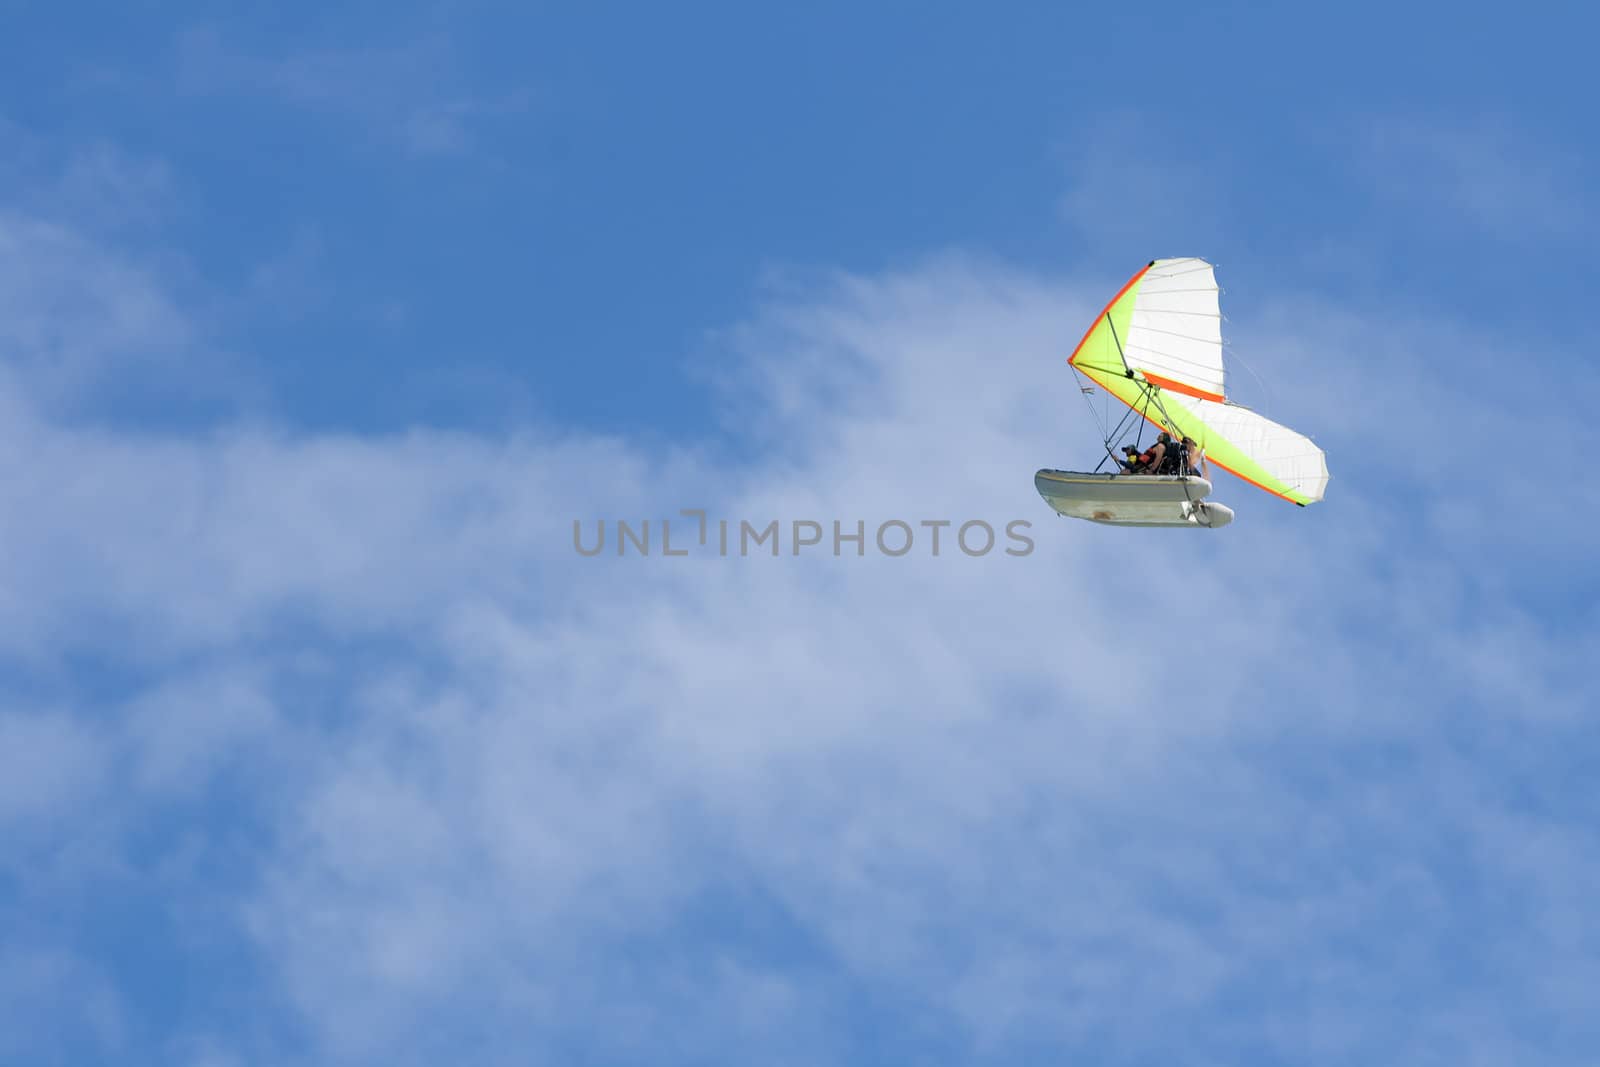 Hang-glider in a blue sky with two men onboard. Cayo Coco, Cuba.